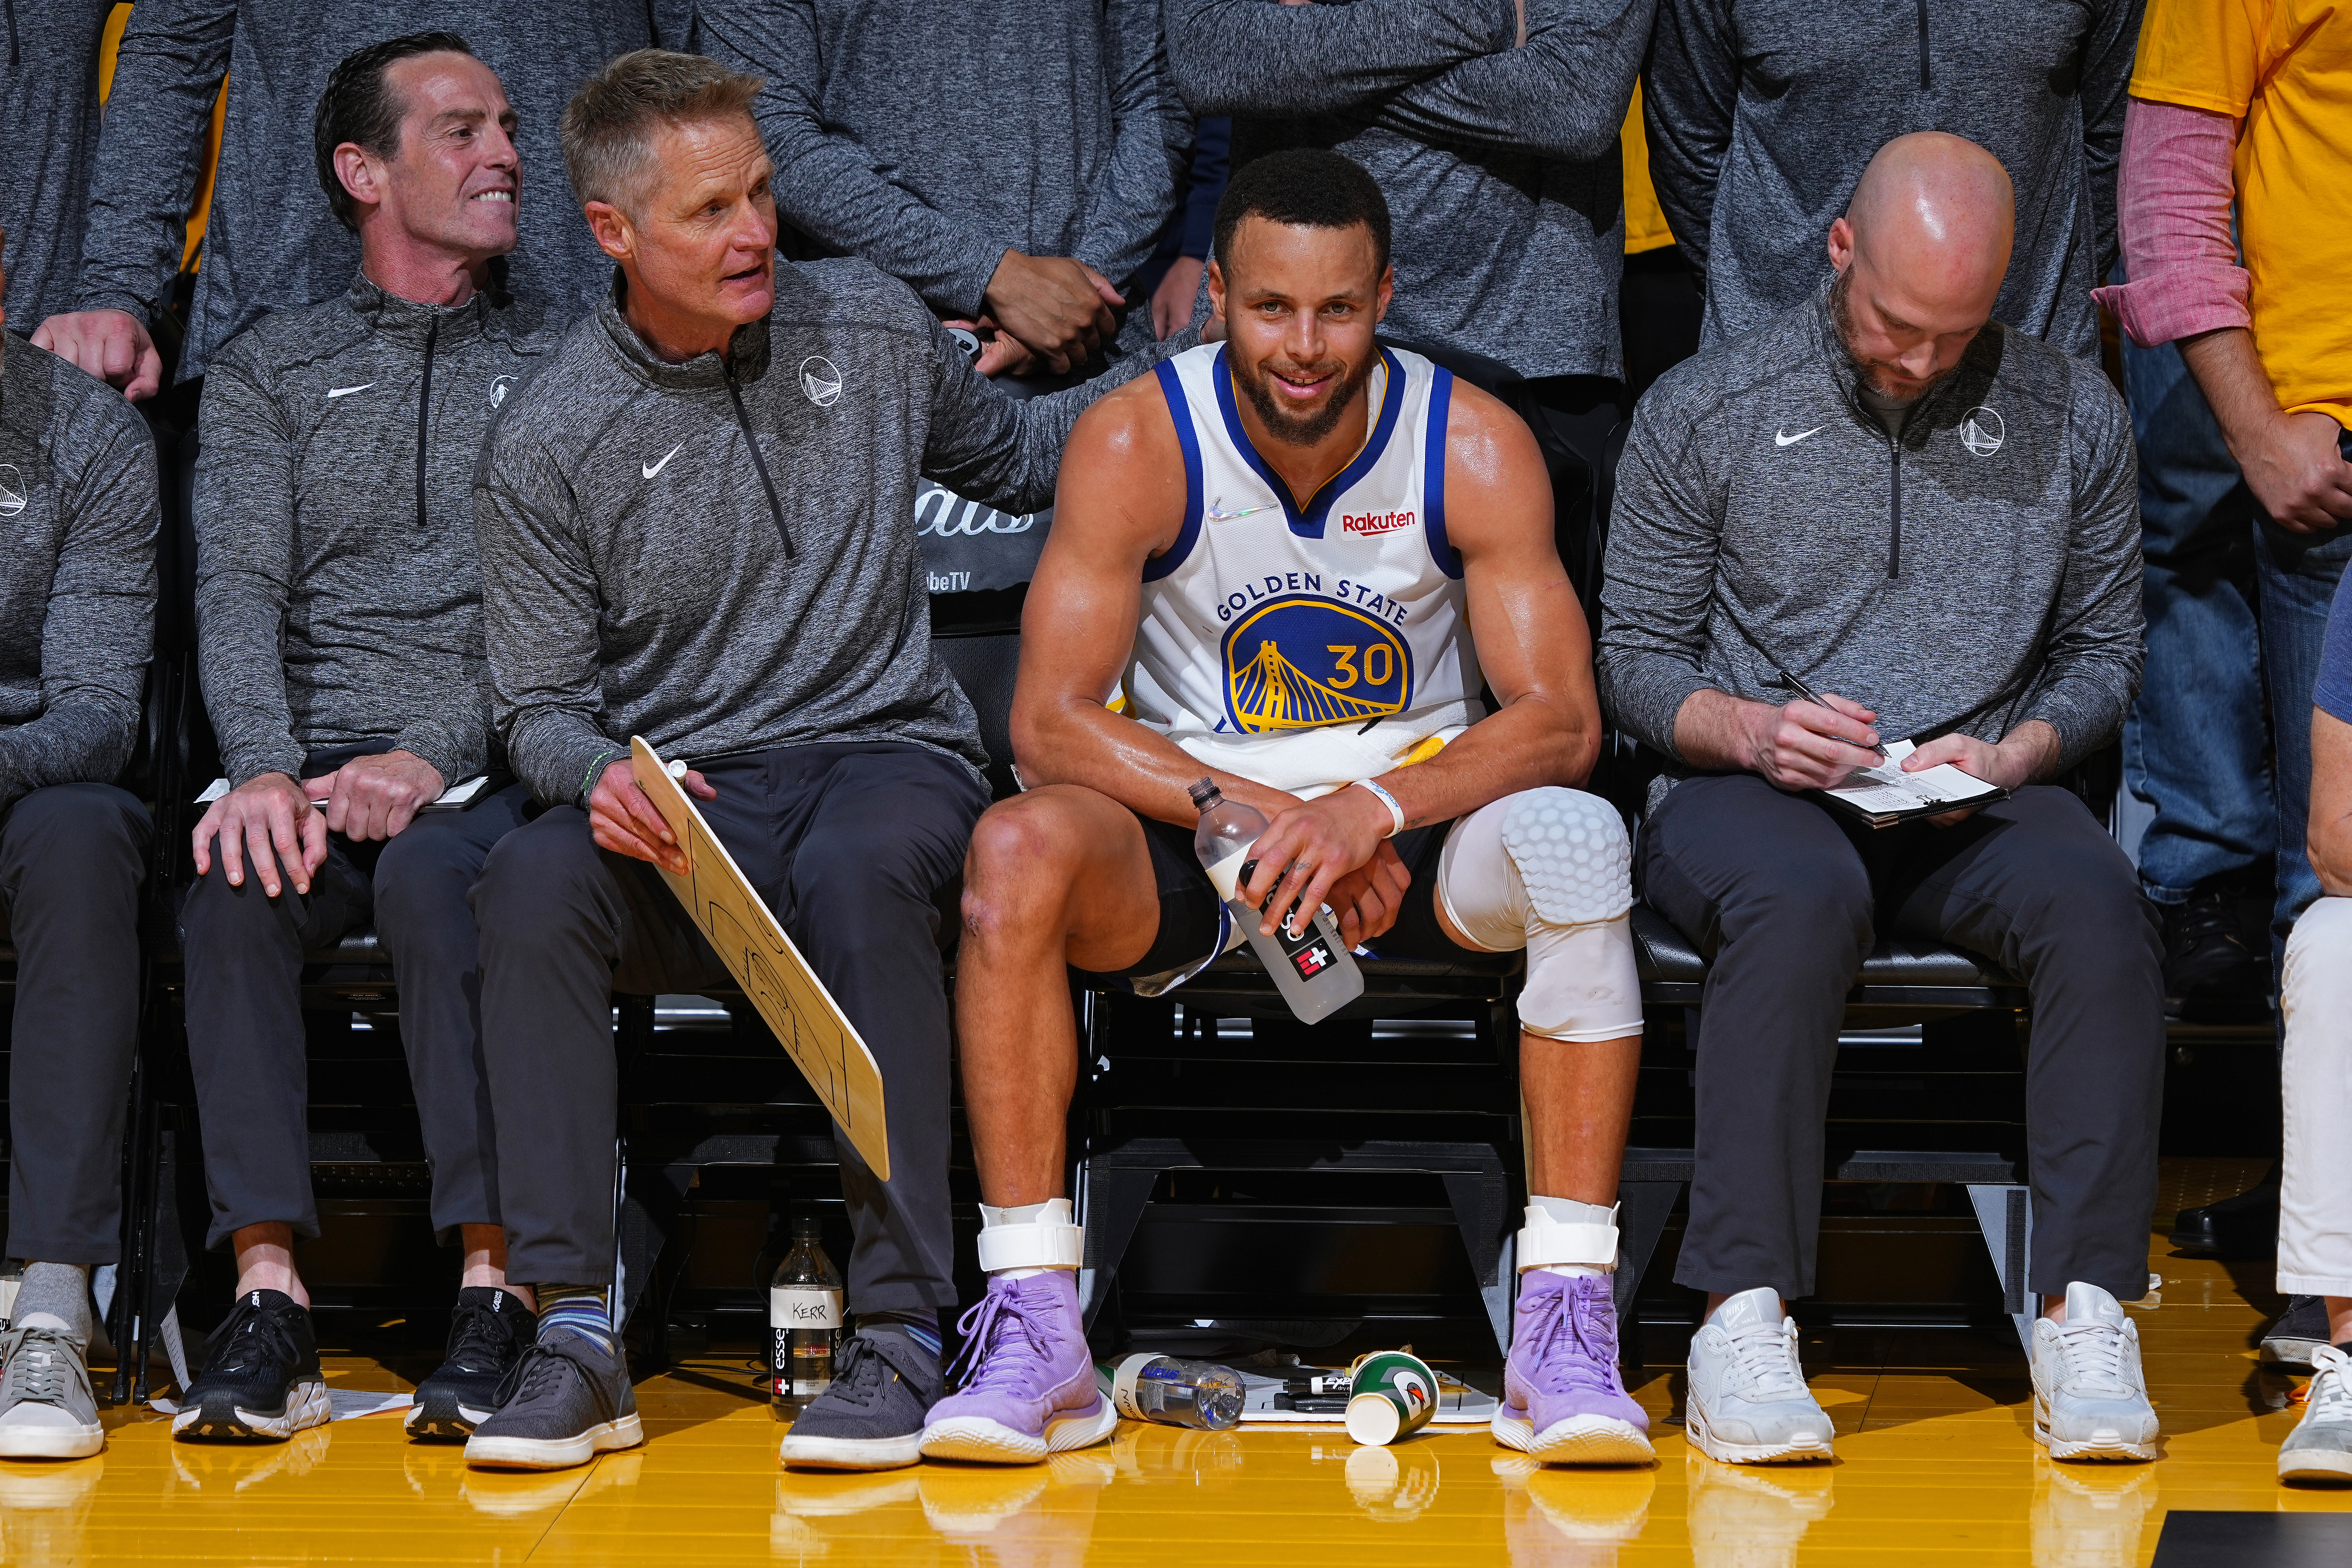 Steph Curry sitting on the bench between coaches